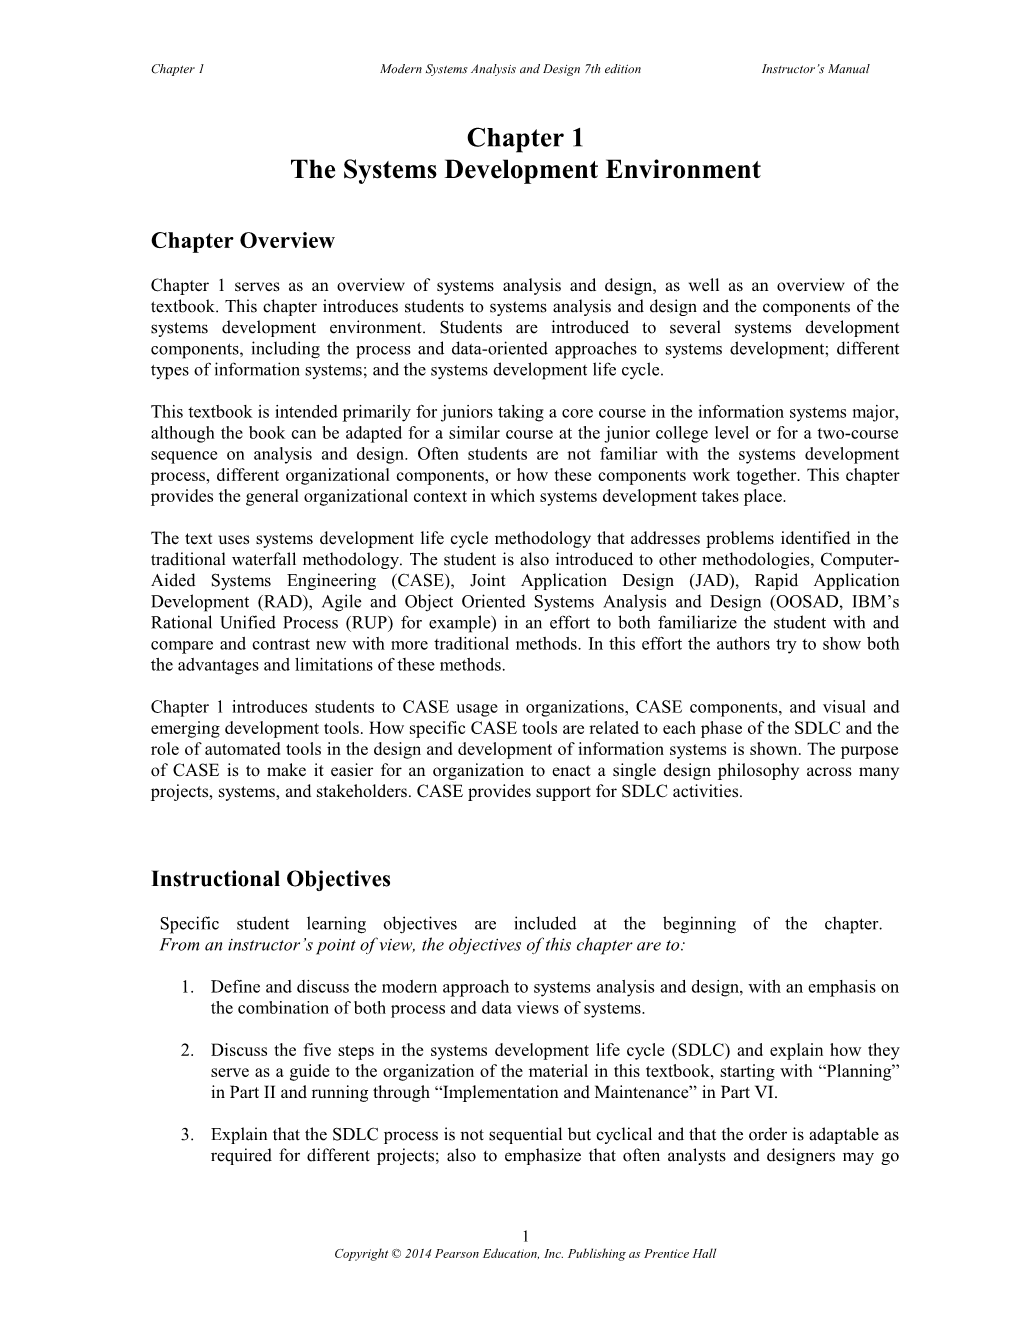 Chapter 1The Systems Development Environment